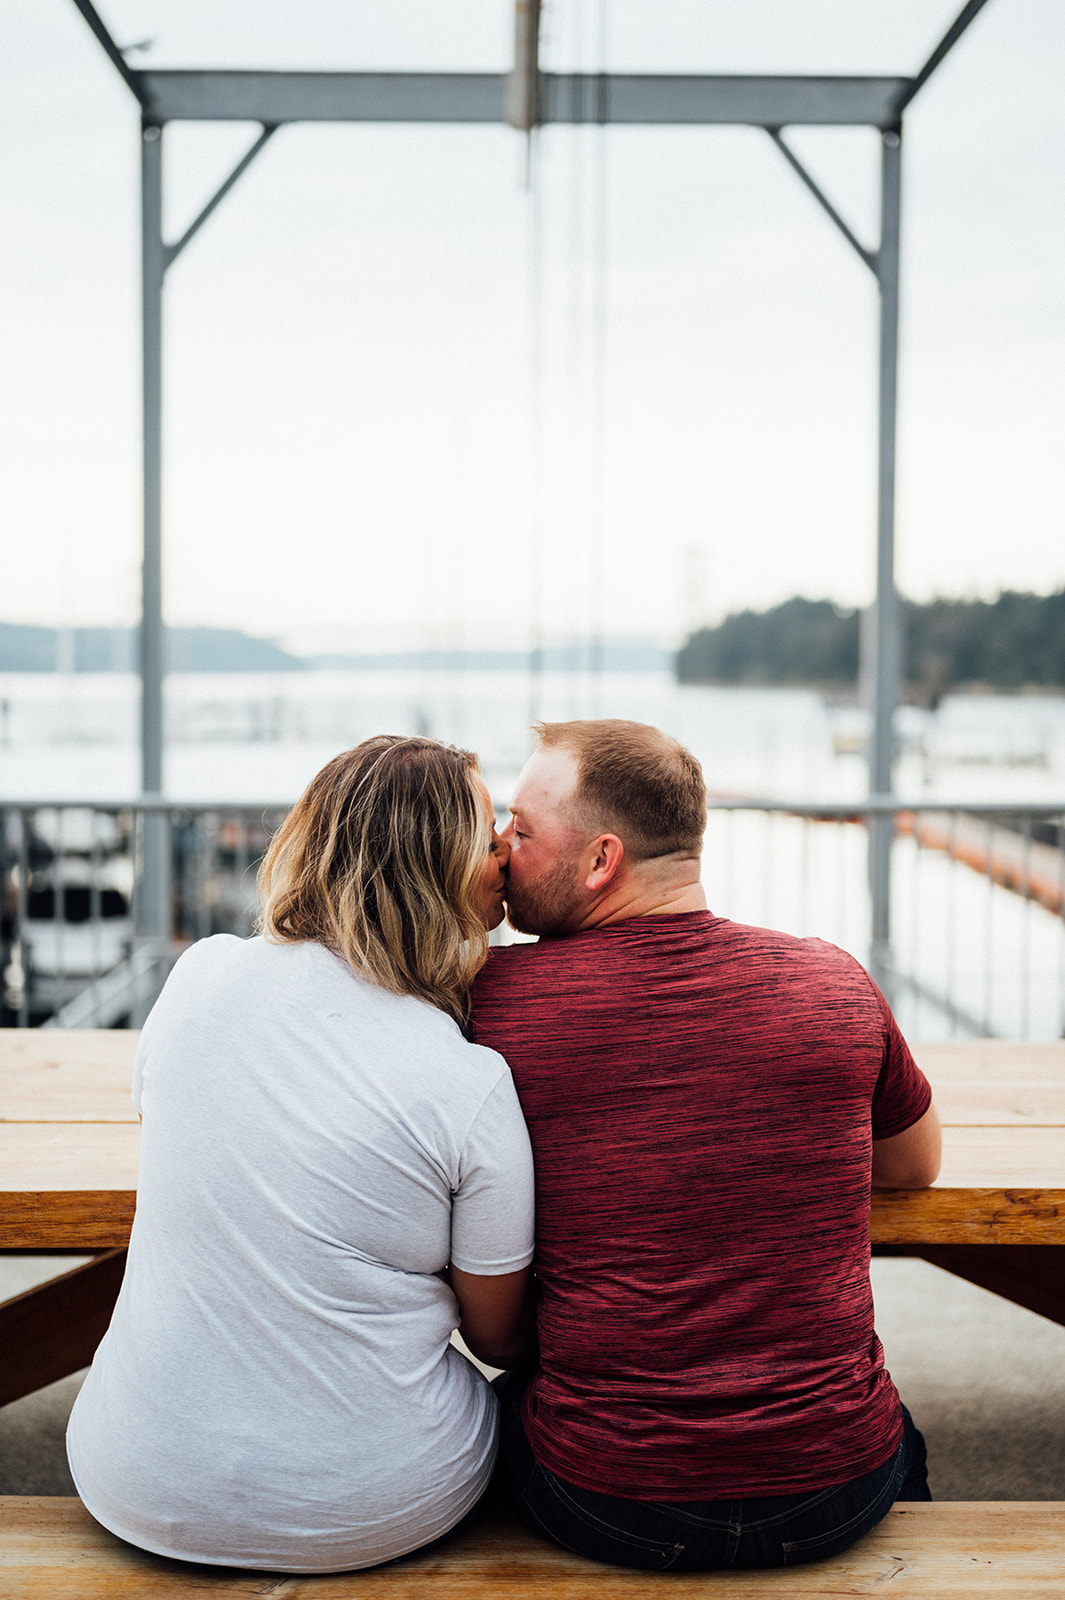 Titlow Beach and Boathouse 19 Engagement